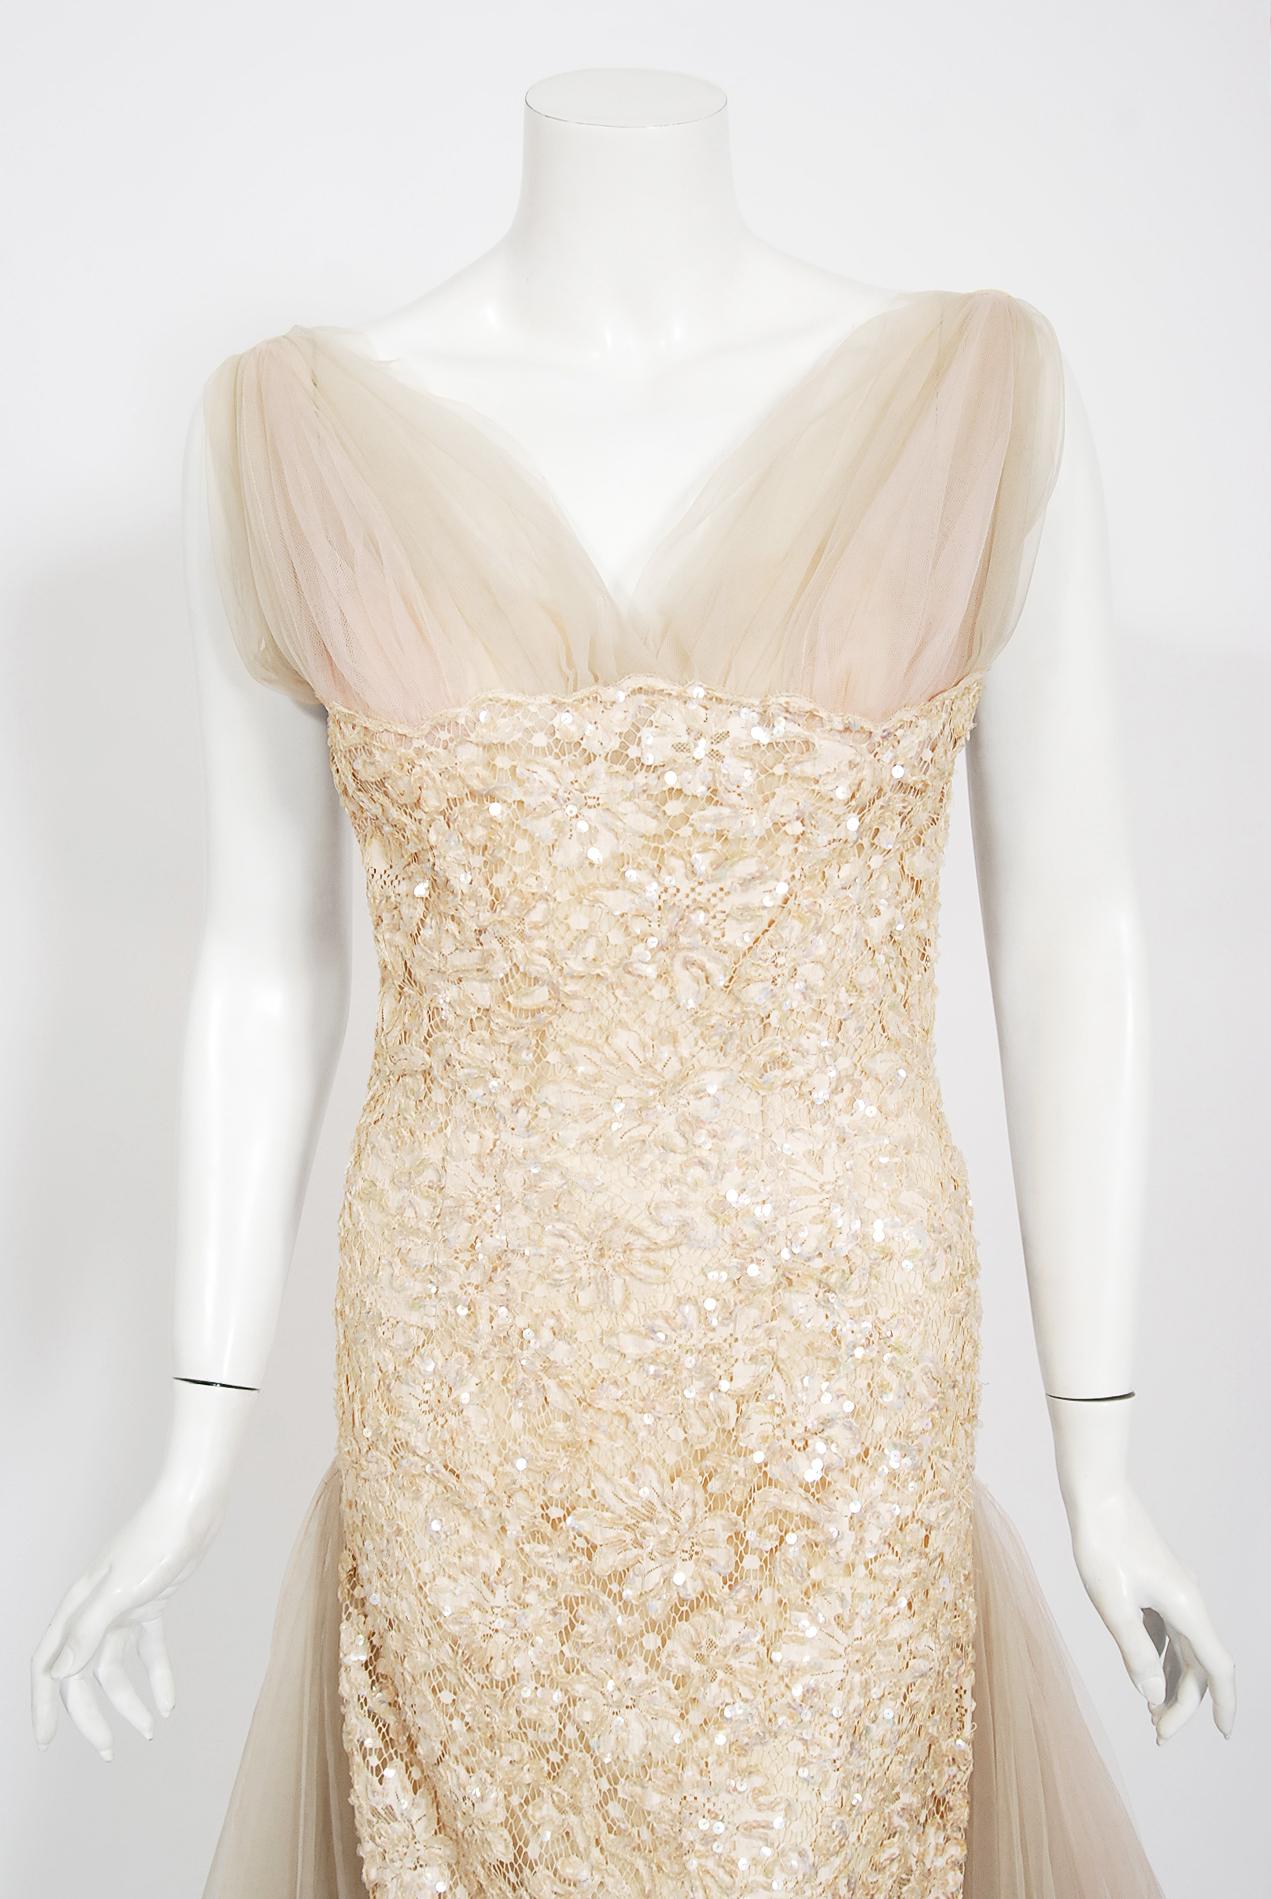 Ethereal 1950's Anne Verdi designer champagne lace hourglass cocktail dress from the Old Hollywood era of glamour! The fabric itself is a masterpiece; high-quality floral motif lace that is beautifully accented with shimmering iridescent sequins.